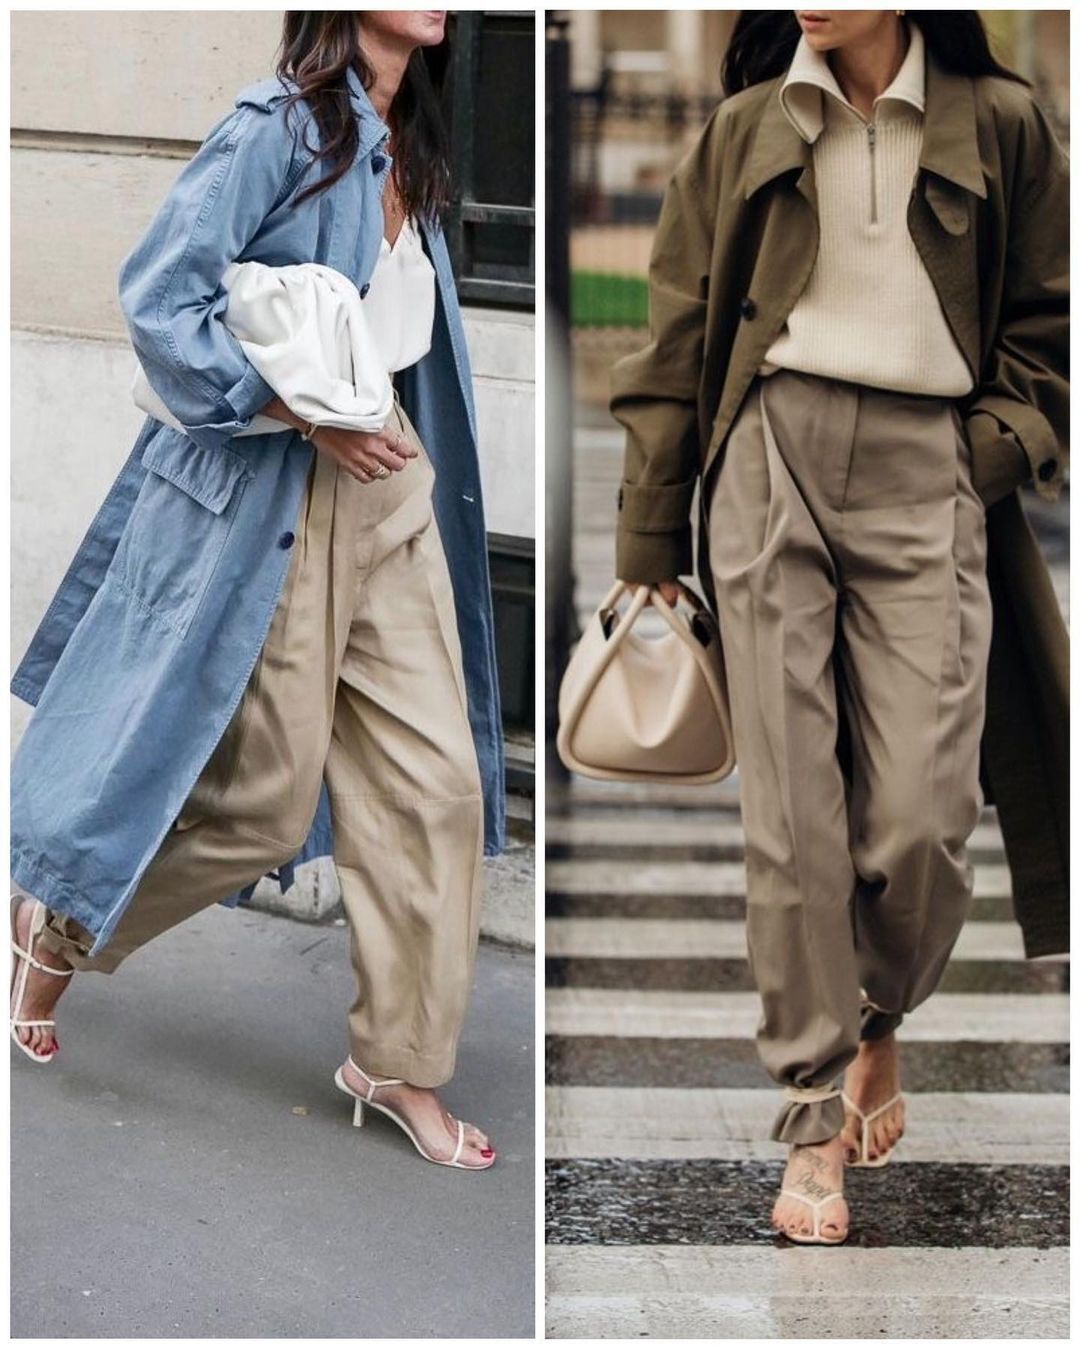 What to wear with sandals in the fall and still look stylish. 5 unexpected outfits